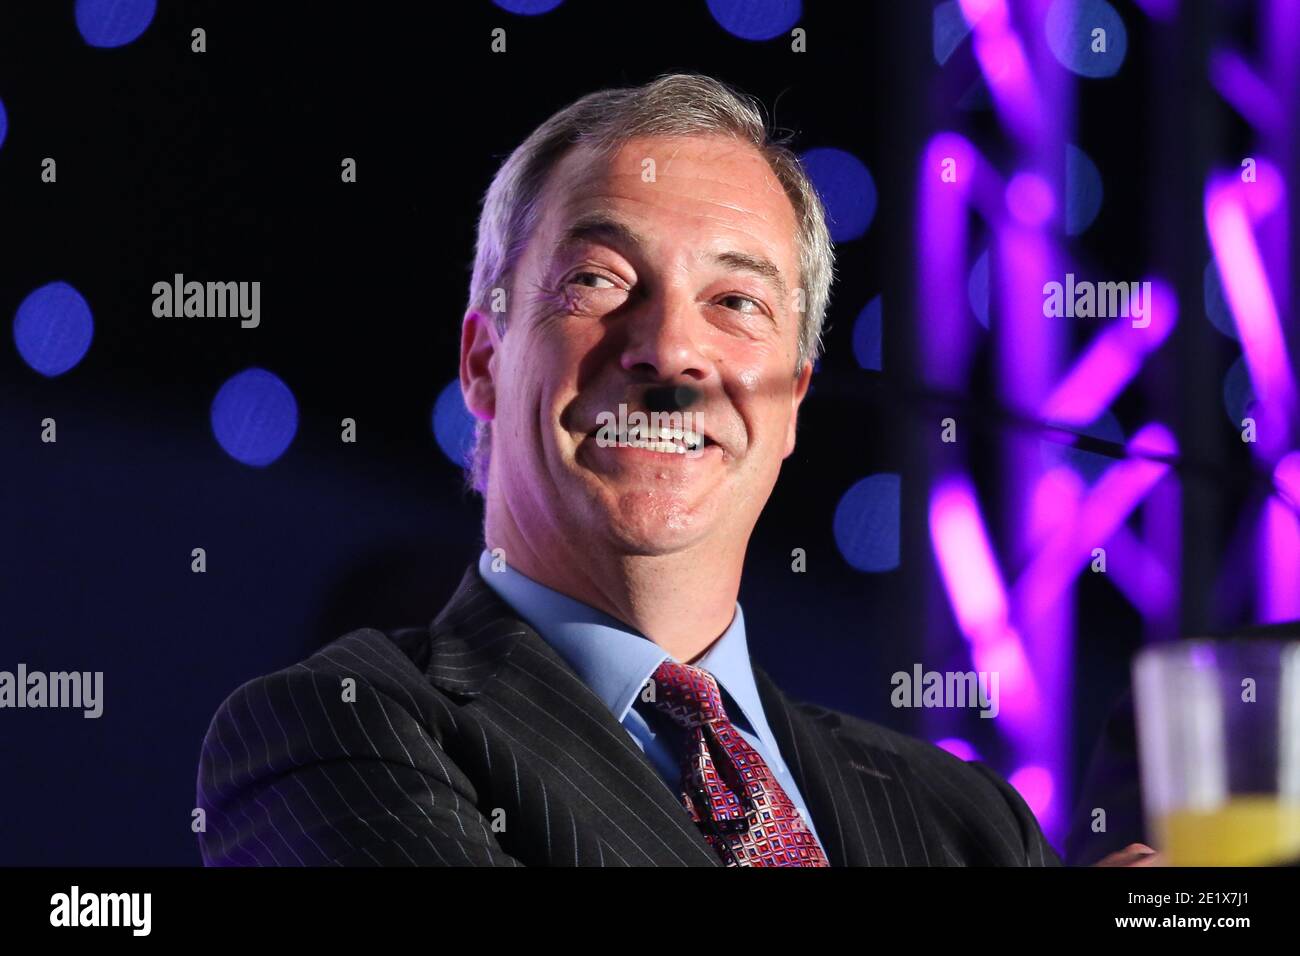 01/06/16. Leeds, UK. UKIP leader Nigel Farage at a UKIP event at Leeds United's Elland Road ground in West Yorkshire in the run up to the EU referendu Stock Photo